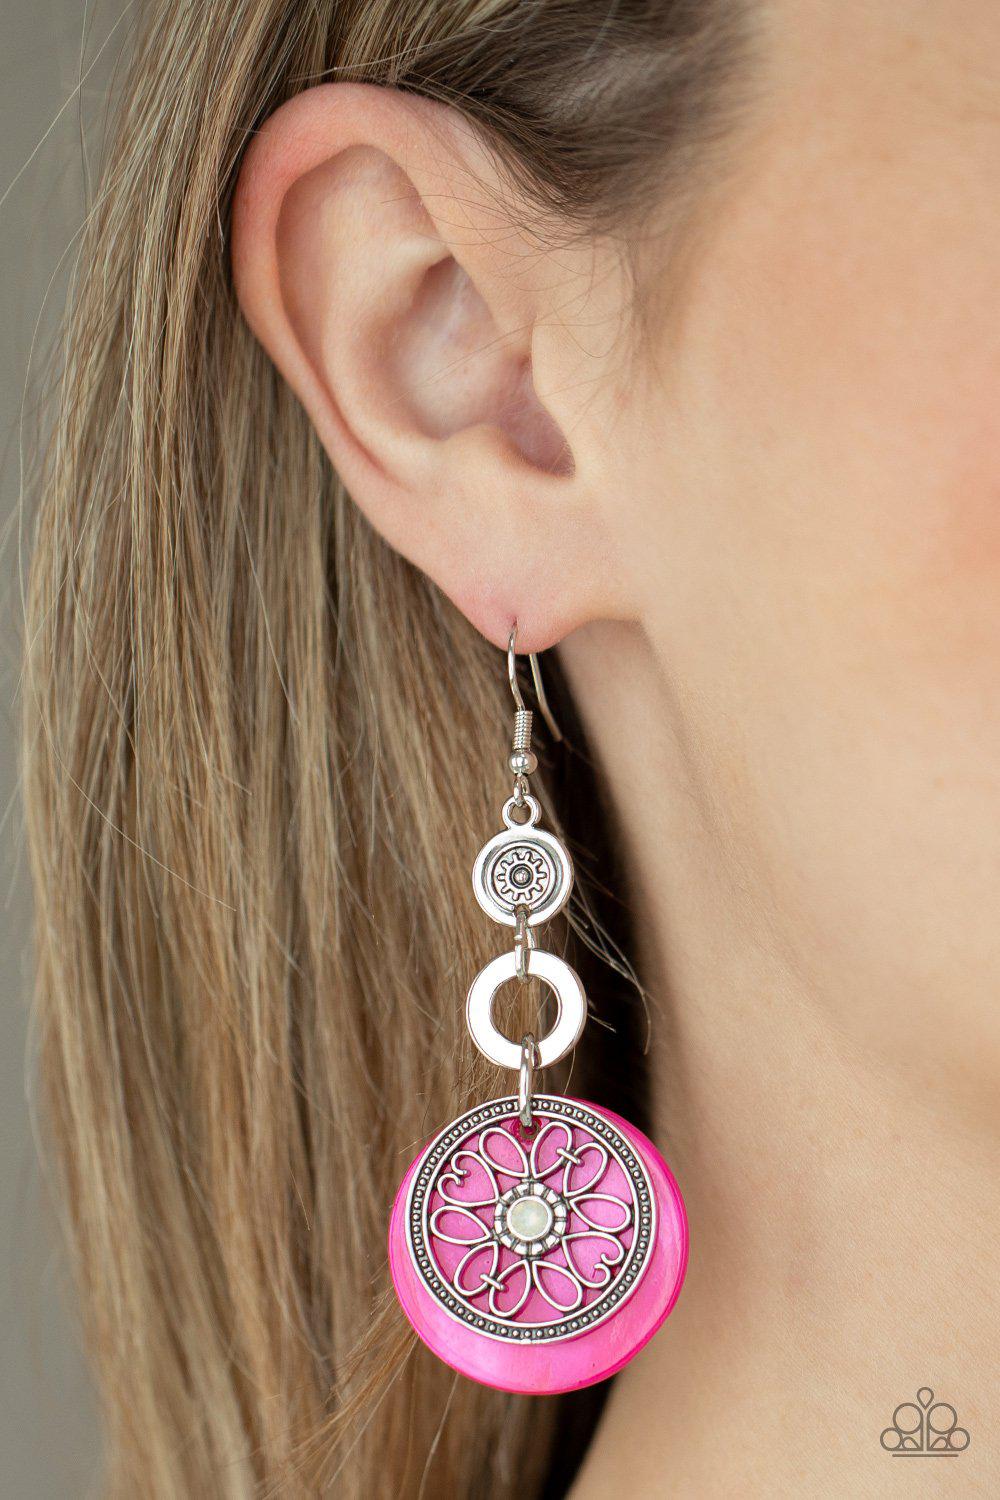 Royal Marina Pink and Silver Earrings - Paparazzi Accessories- model - CarasShop.com - $5 Jewelry by Cara Jewels